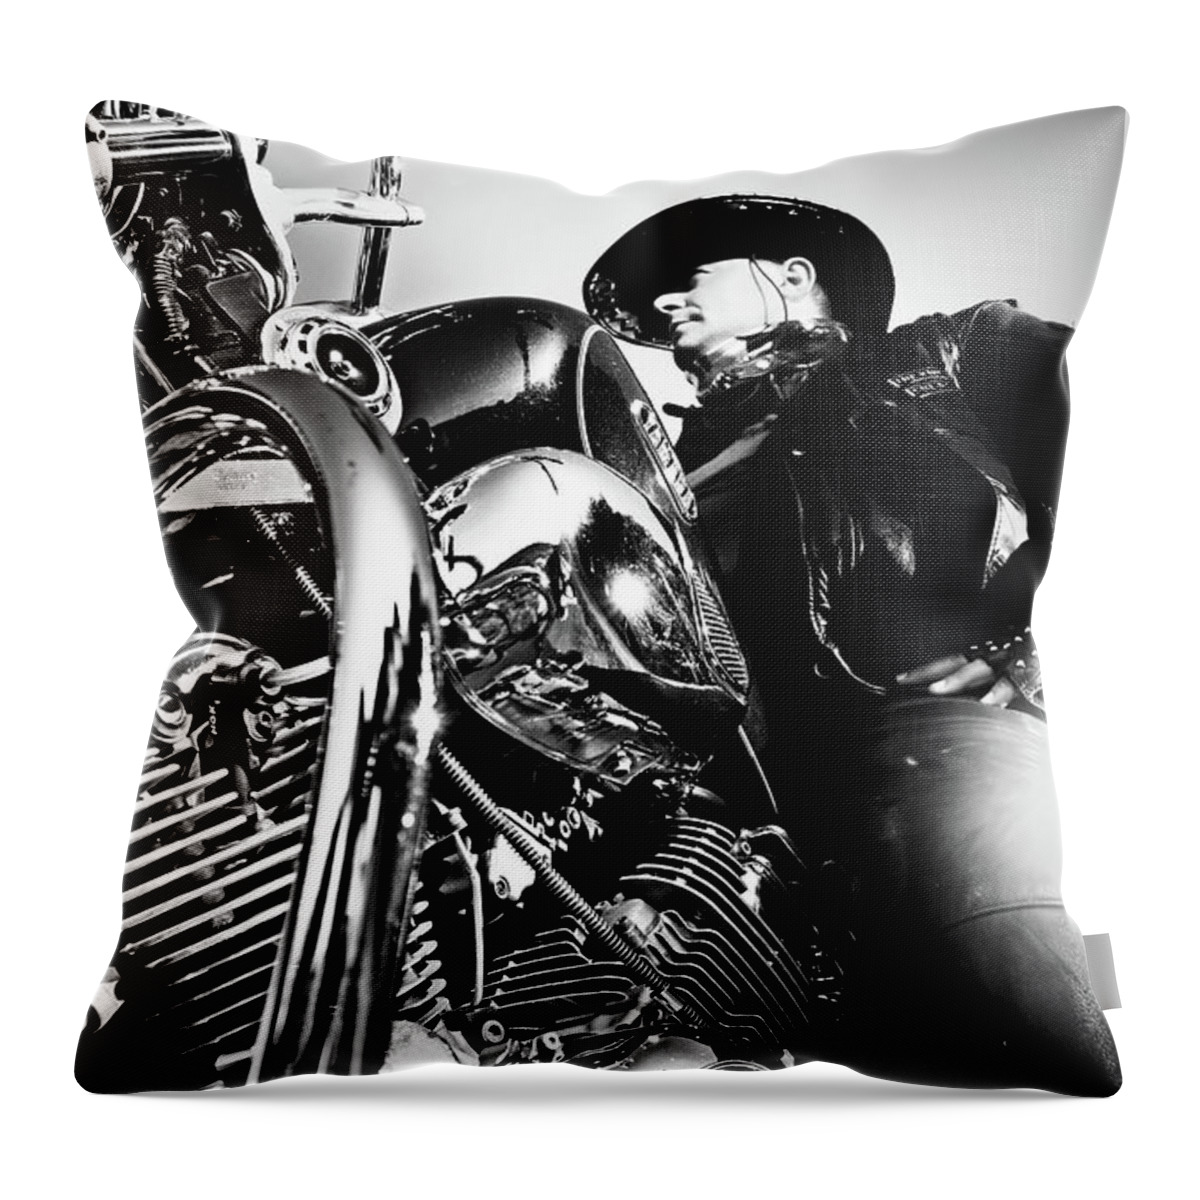 Motorcycle Throw Pillow featuring the photograph Portrait of biker man sitting on motorcycle - black and white by Dimitar Hristov